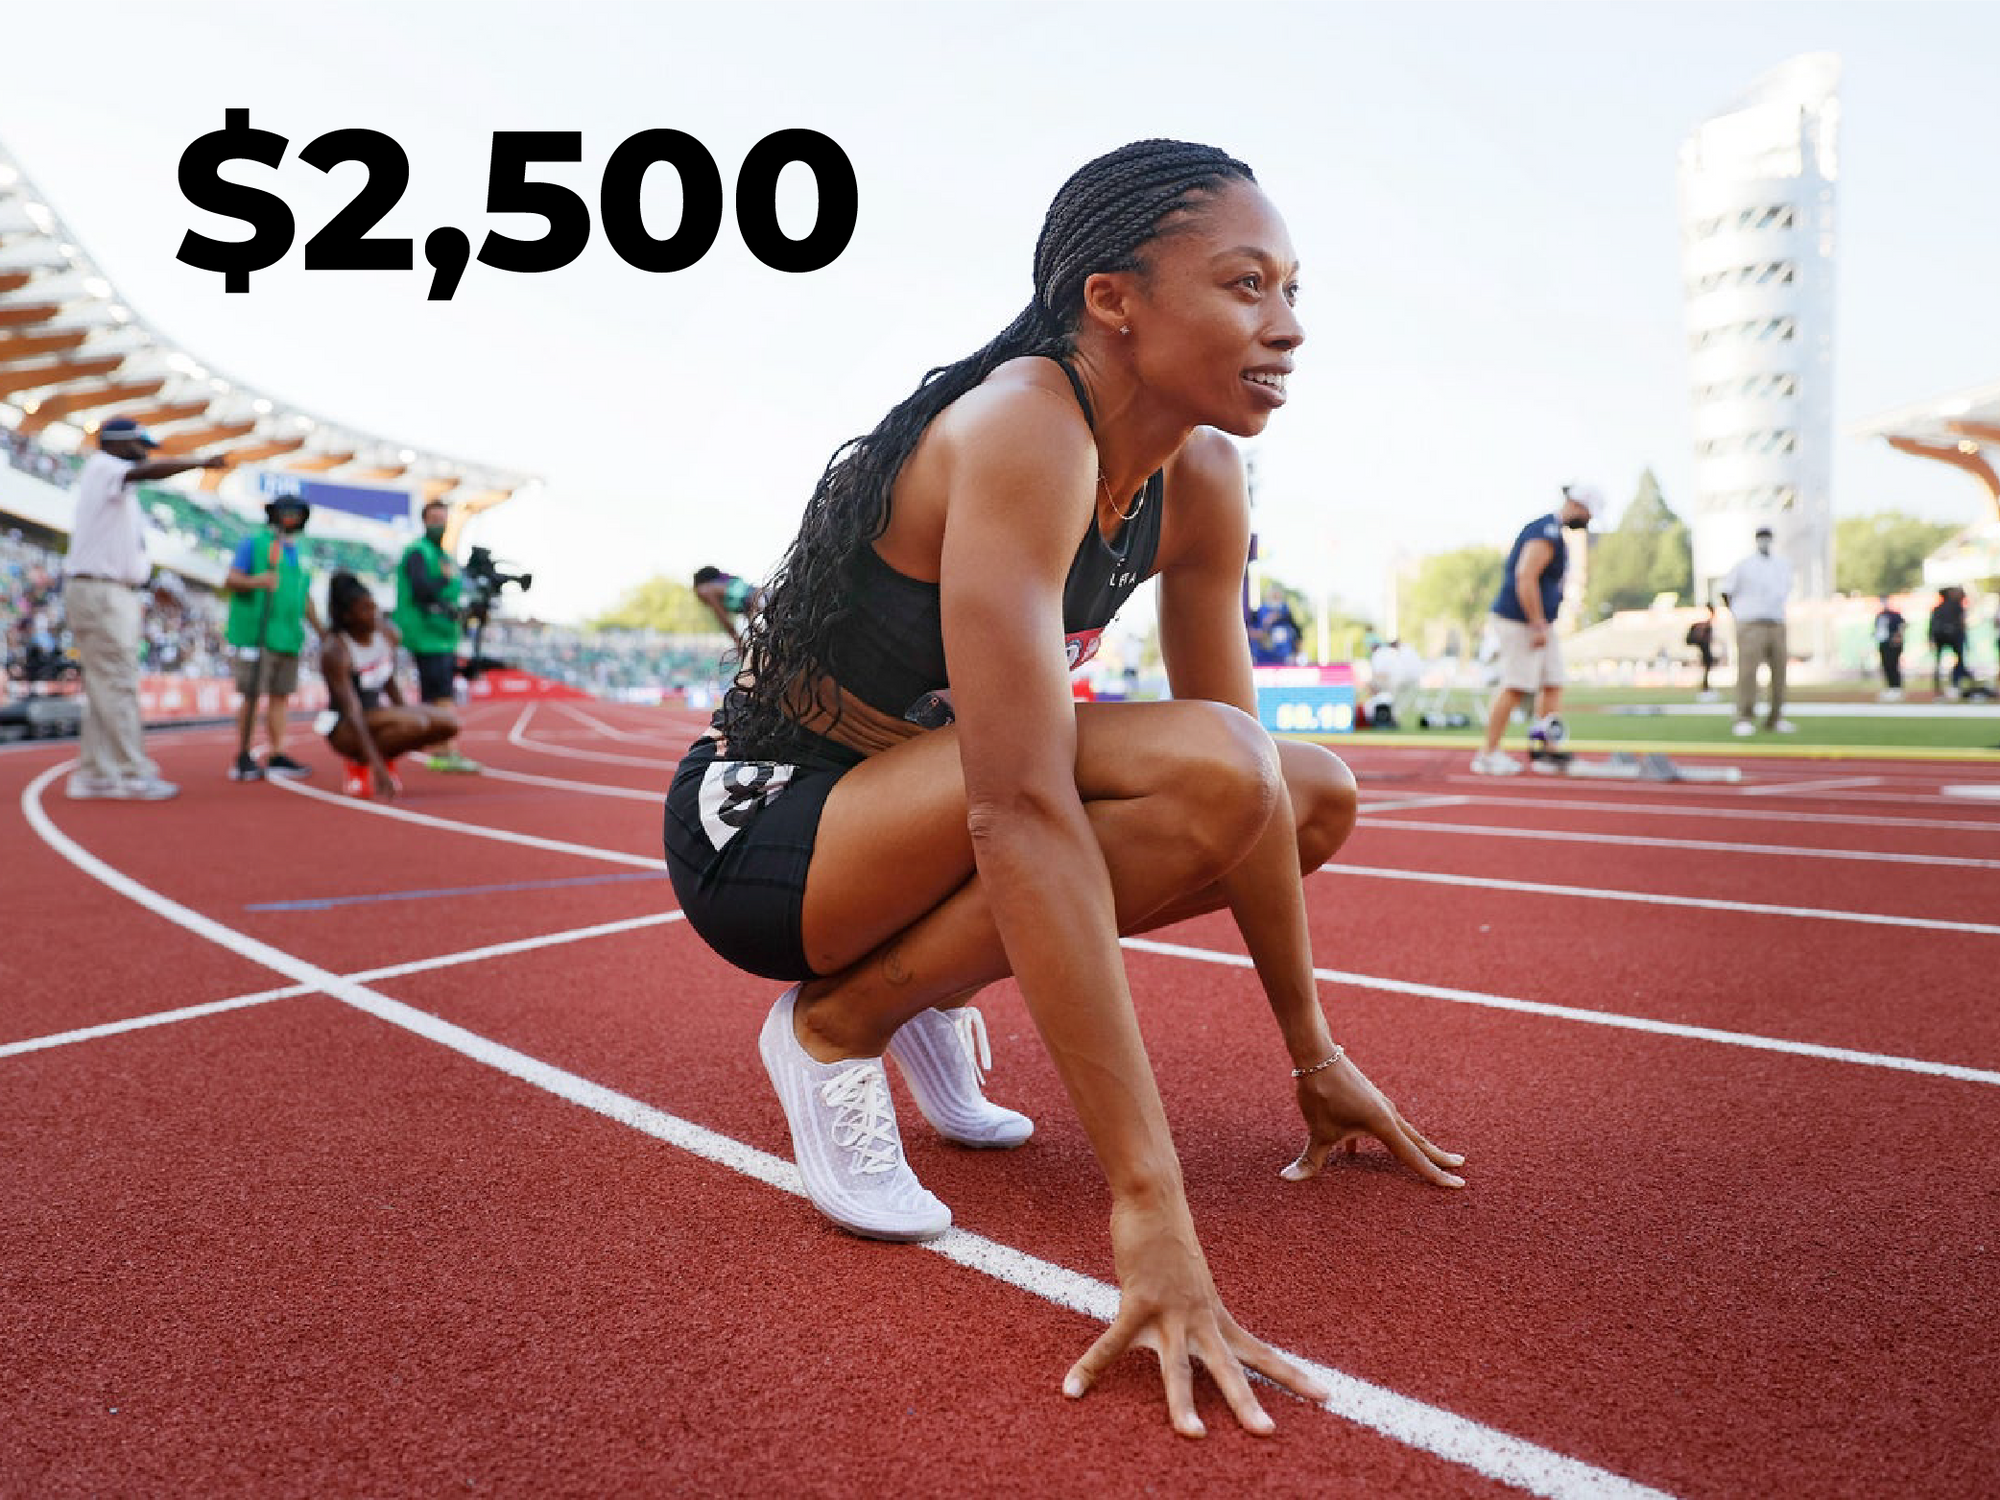 Allyson Felix's New Track Spikes 2021, Cost $2500